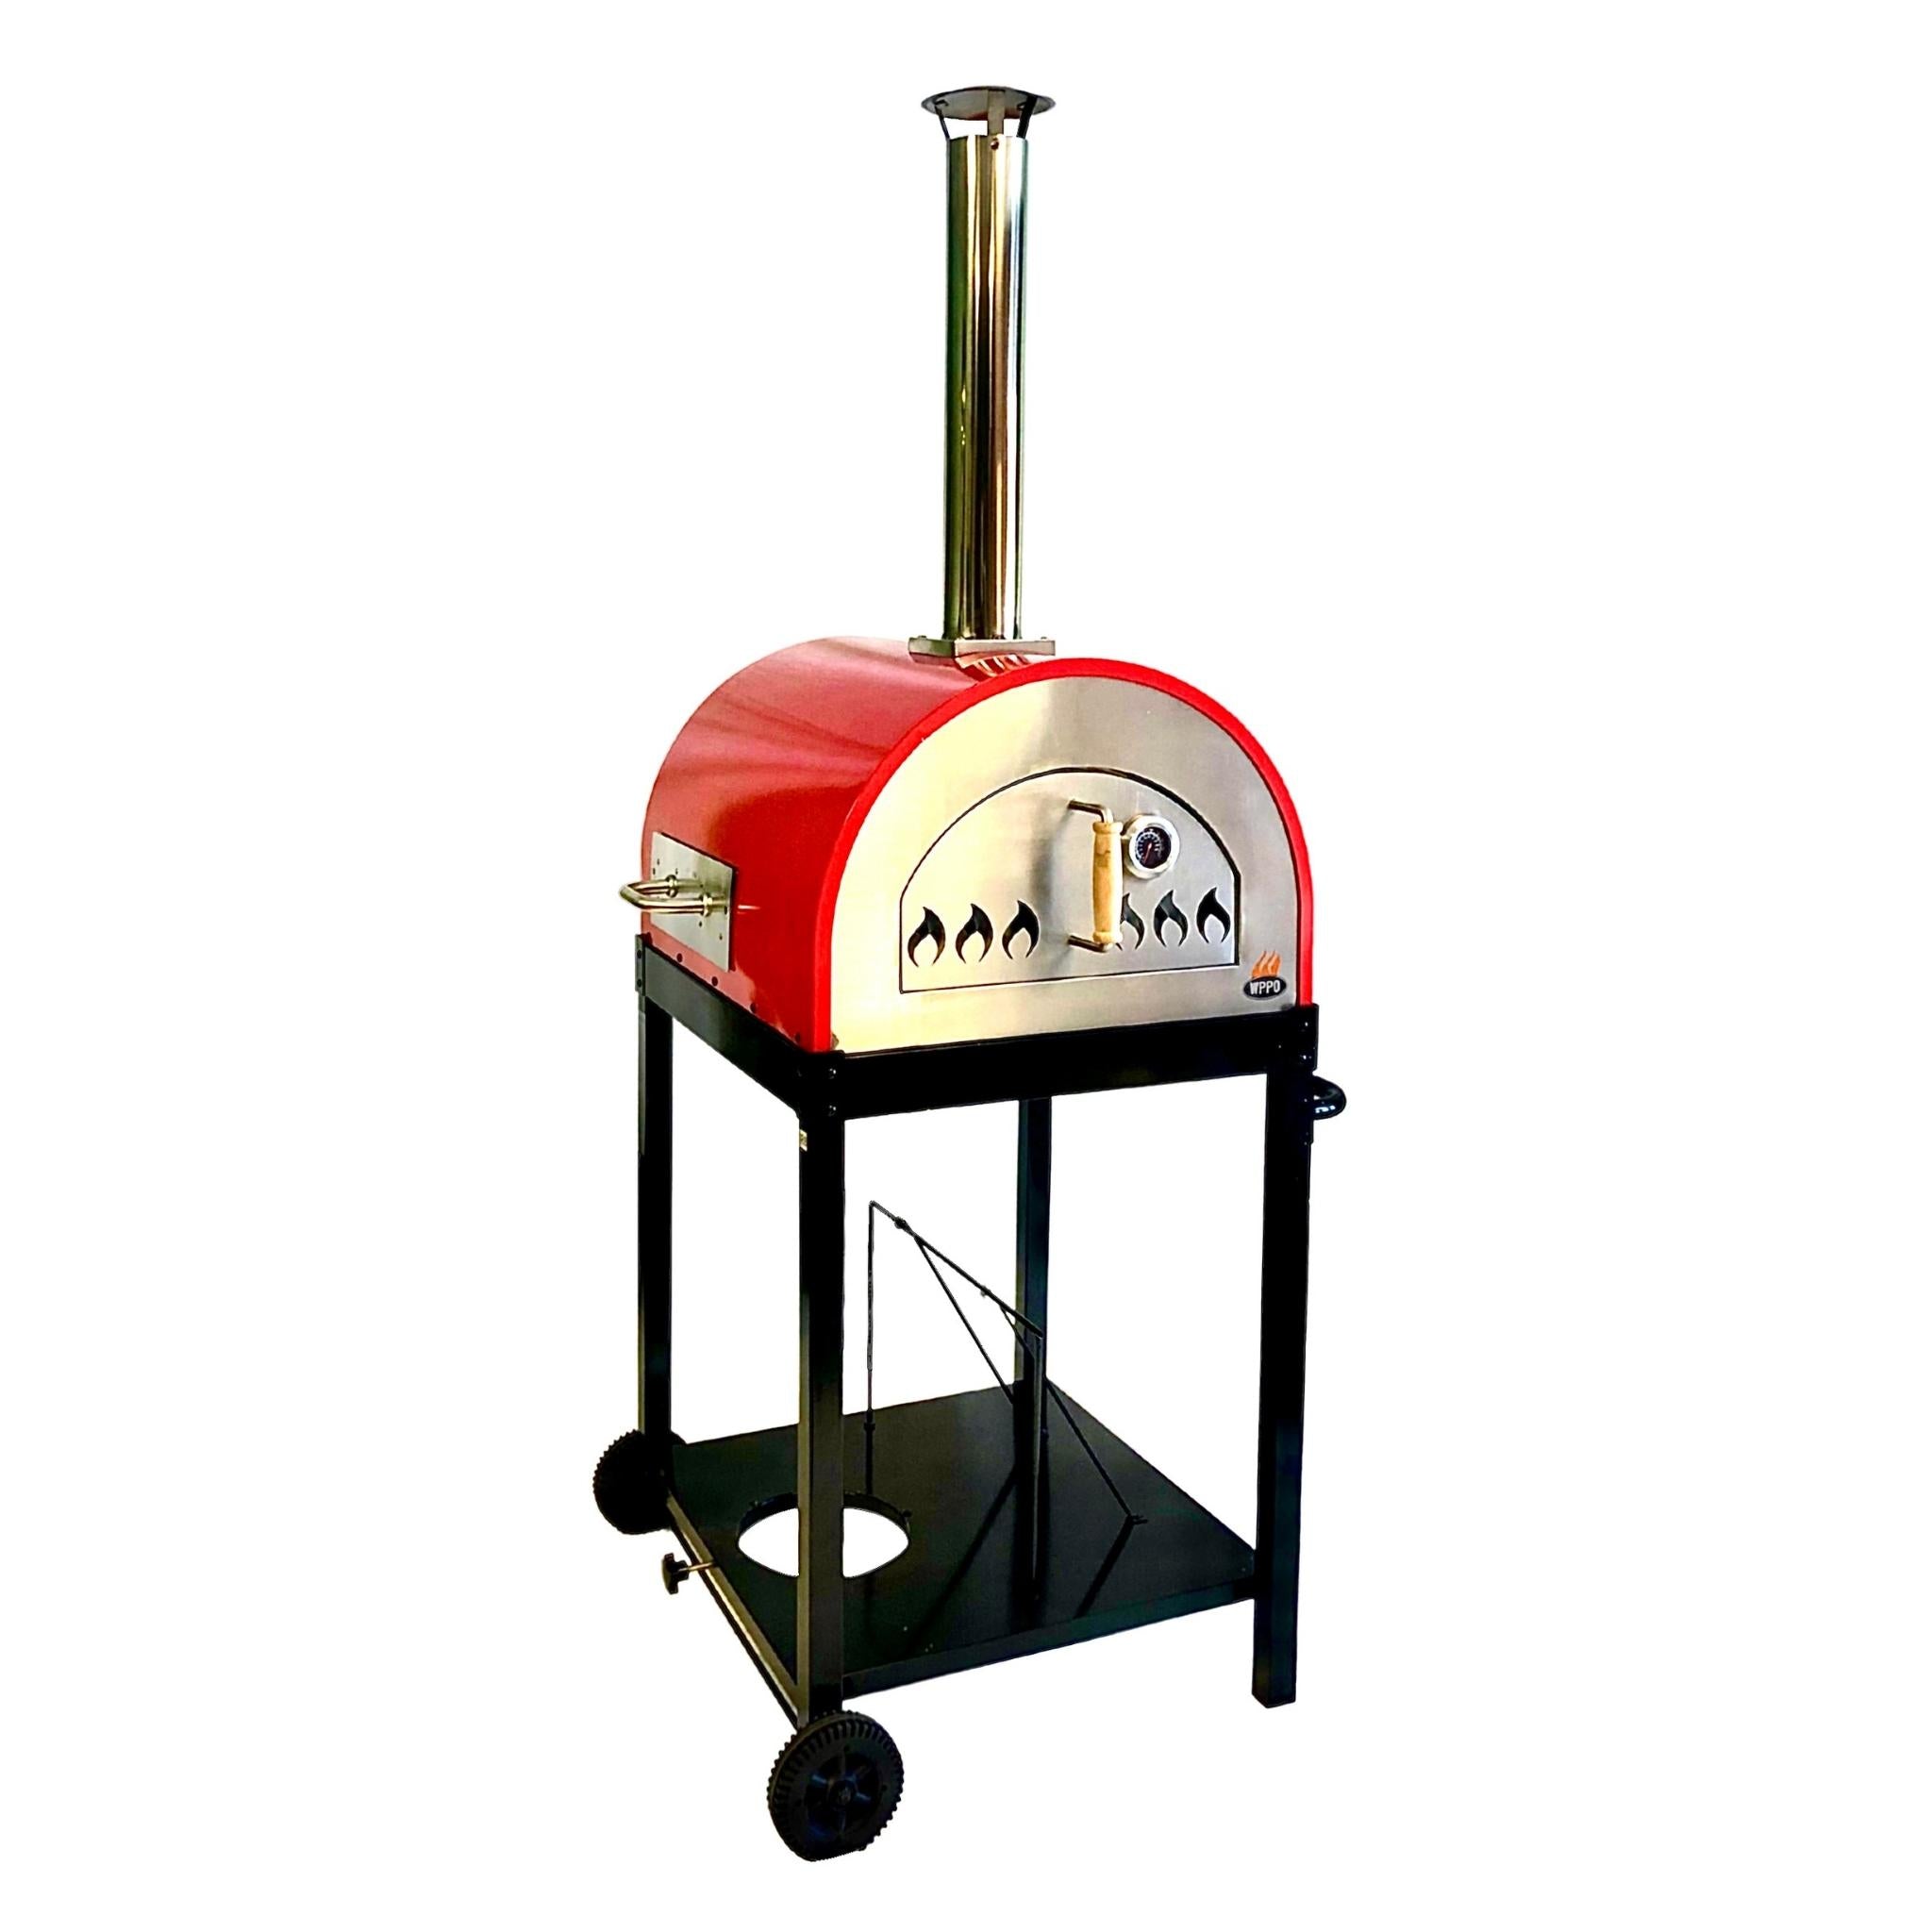  Deluxe Shop Powder Coating Oven : Everything Else